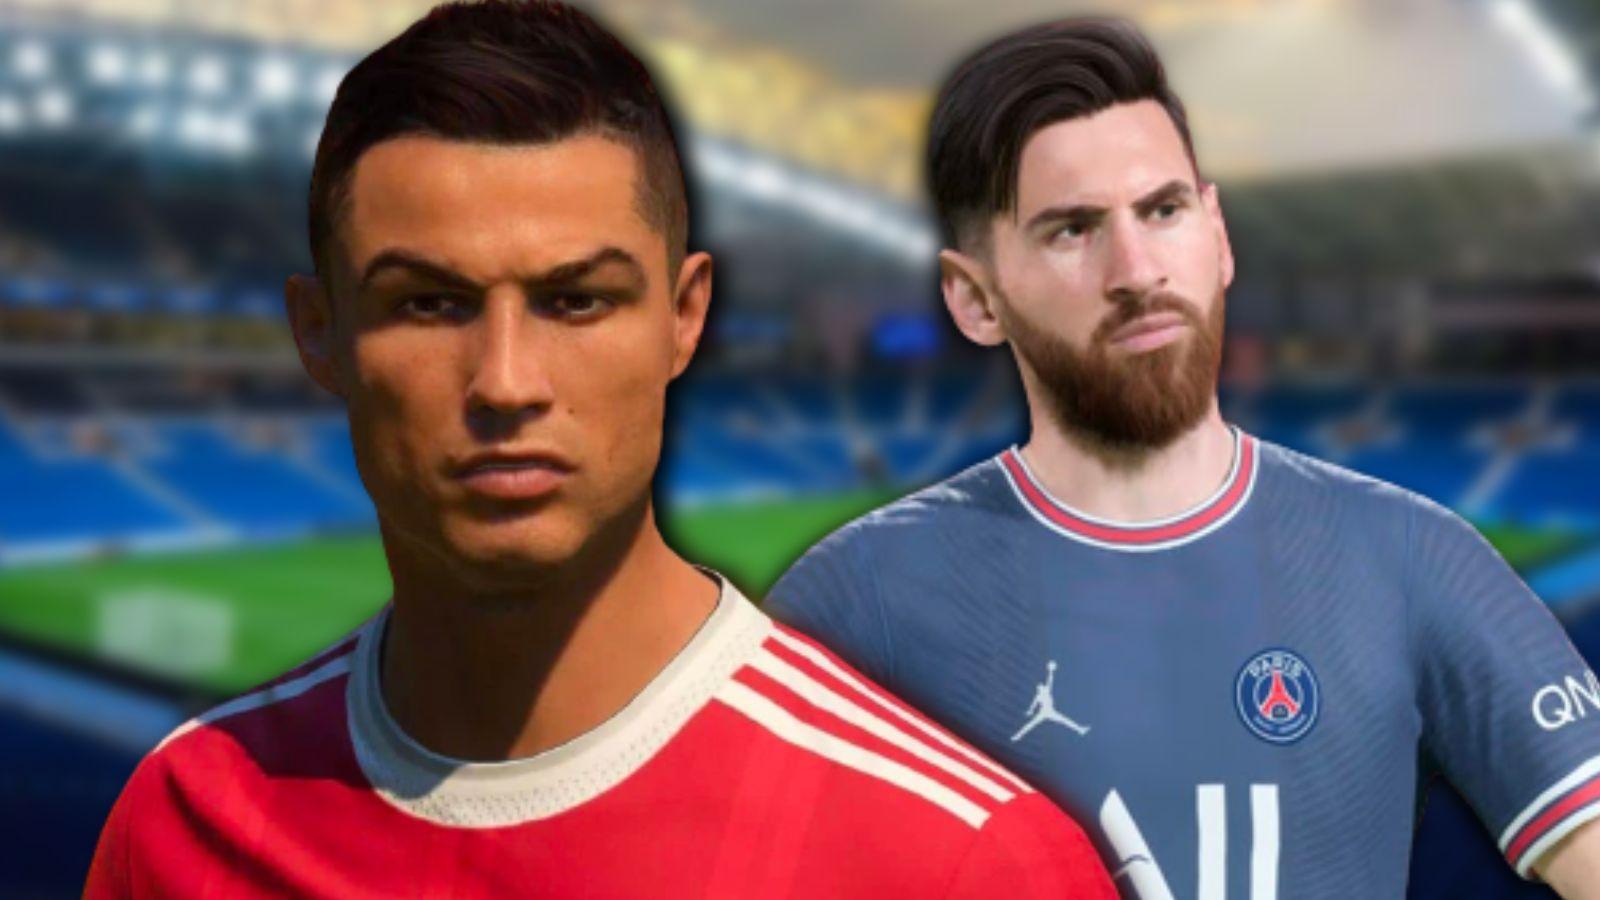 FIFA will regret losing EA deal and new World Cup games prove it - Dexerto